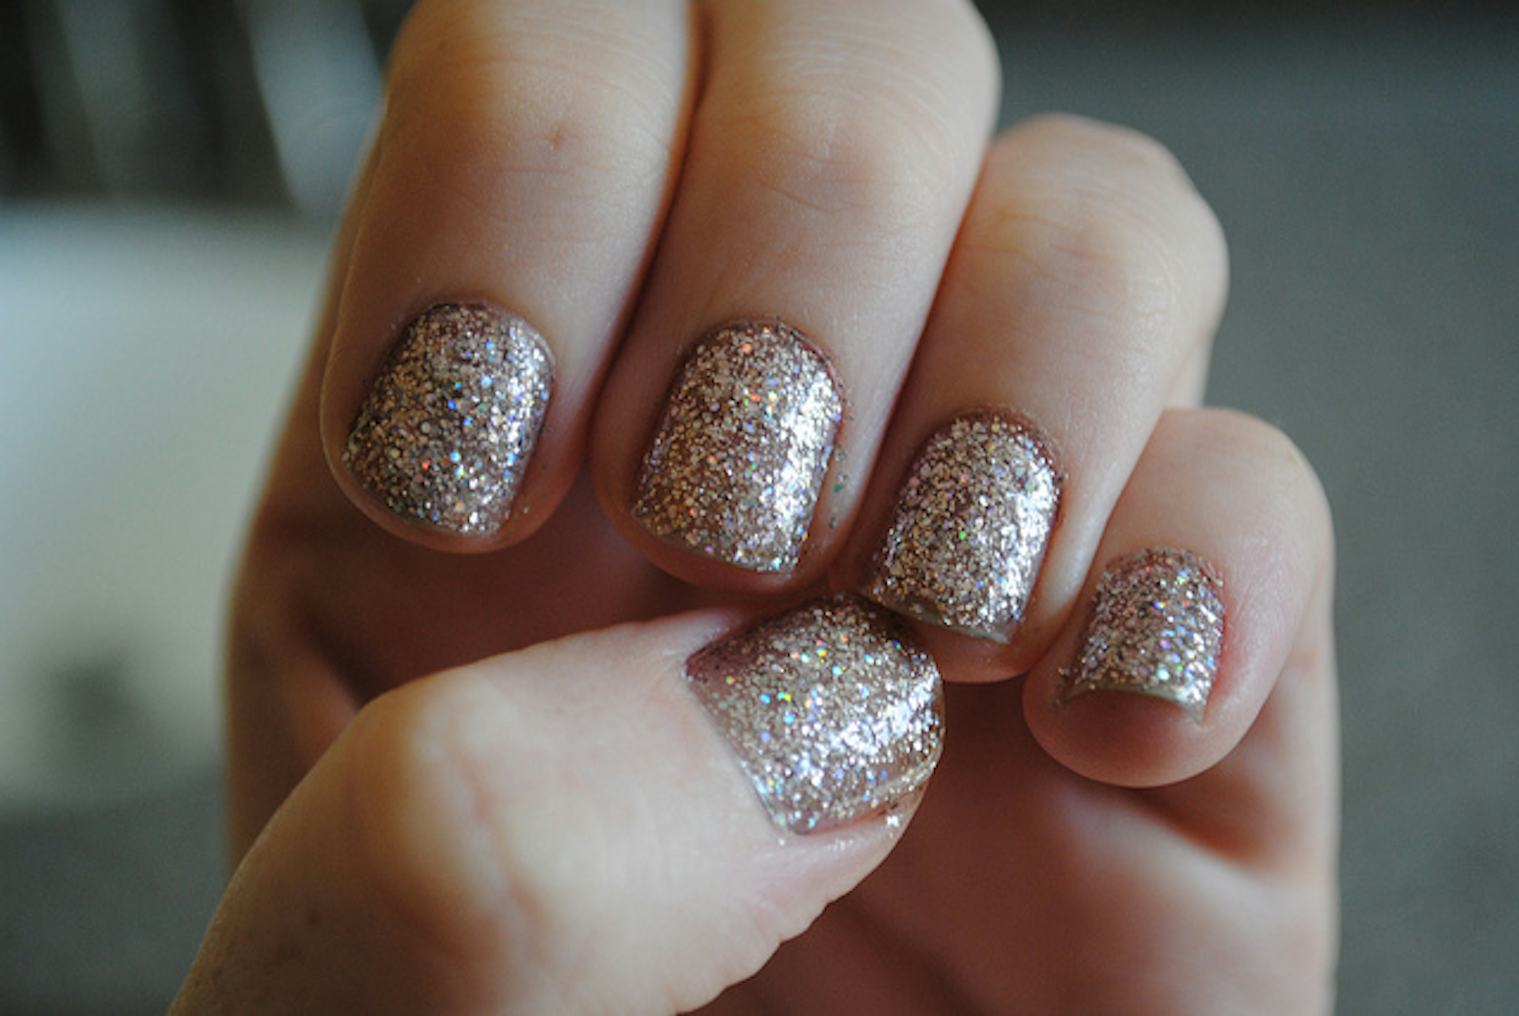 21 Undeniable Signs You Have a Nail Polish Addiction